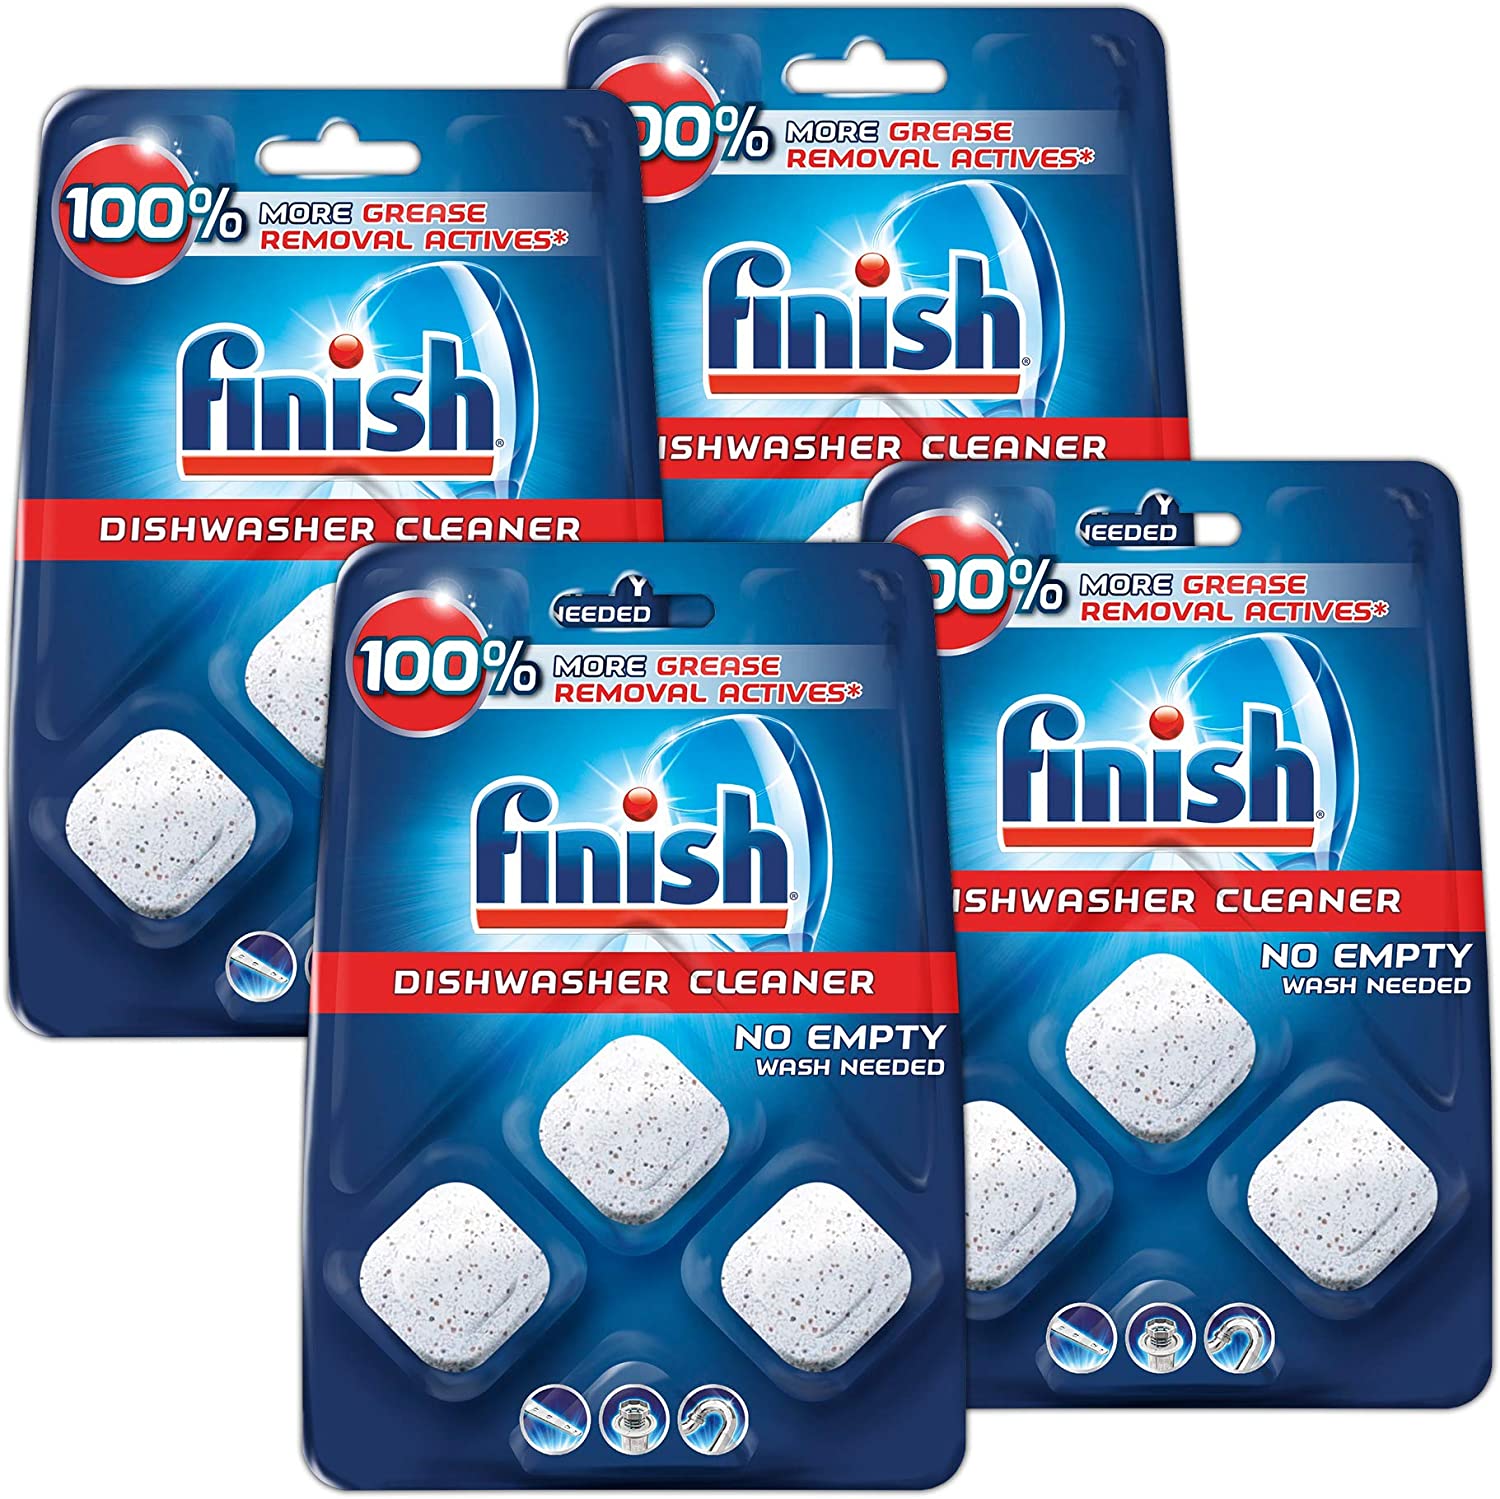 Finish In-Wash Dishwasher Cleaner- Clean Hidden Grease and Grime, 12 ct